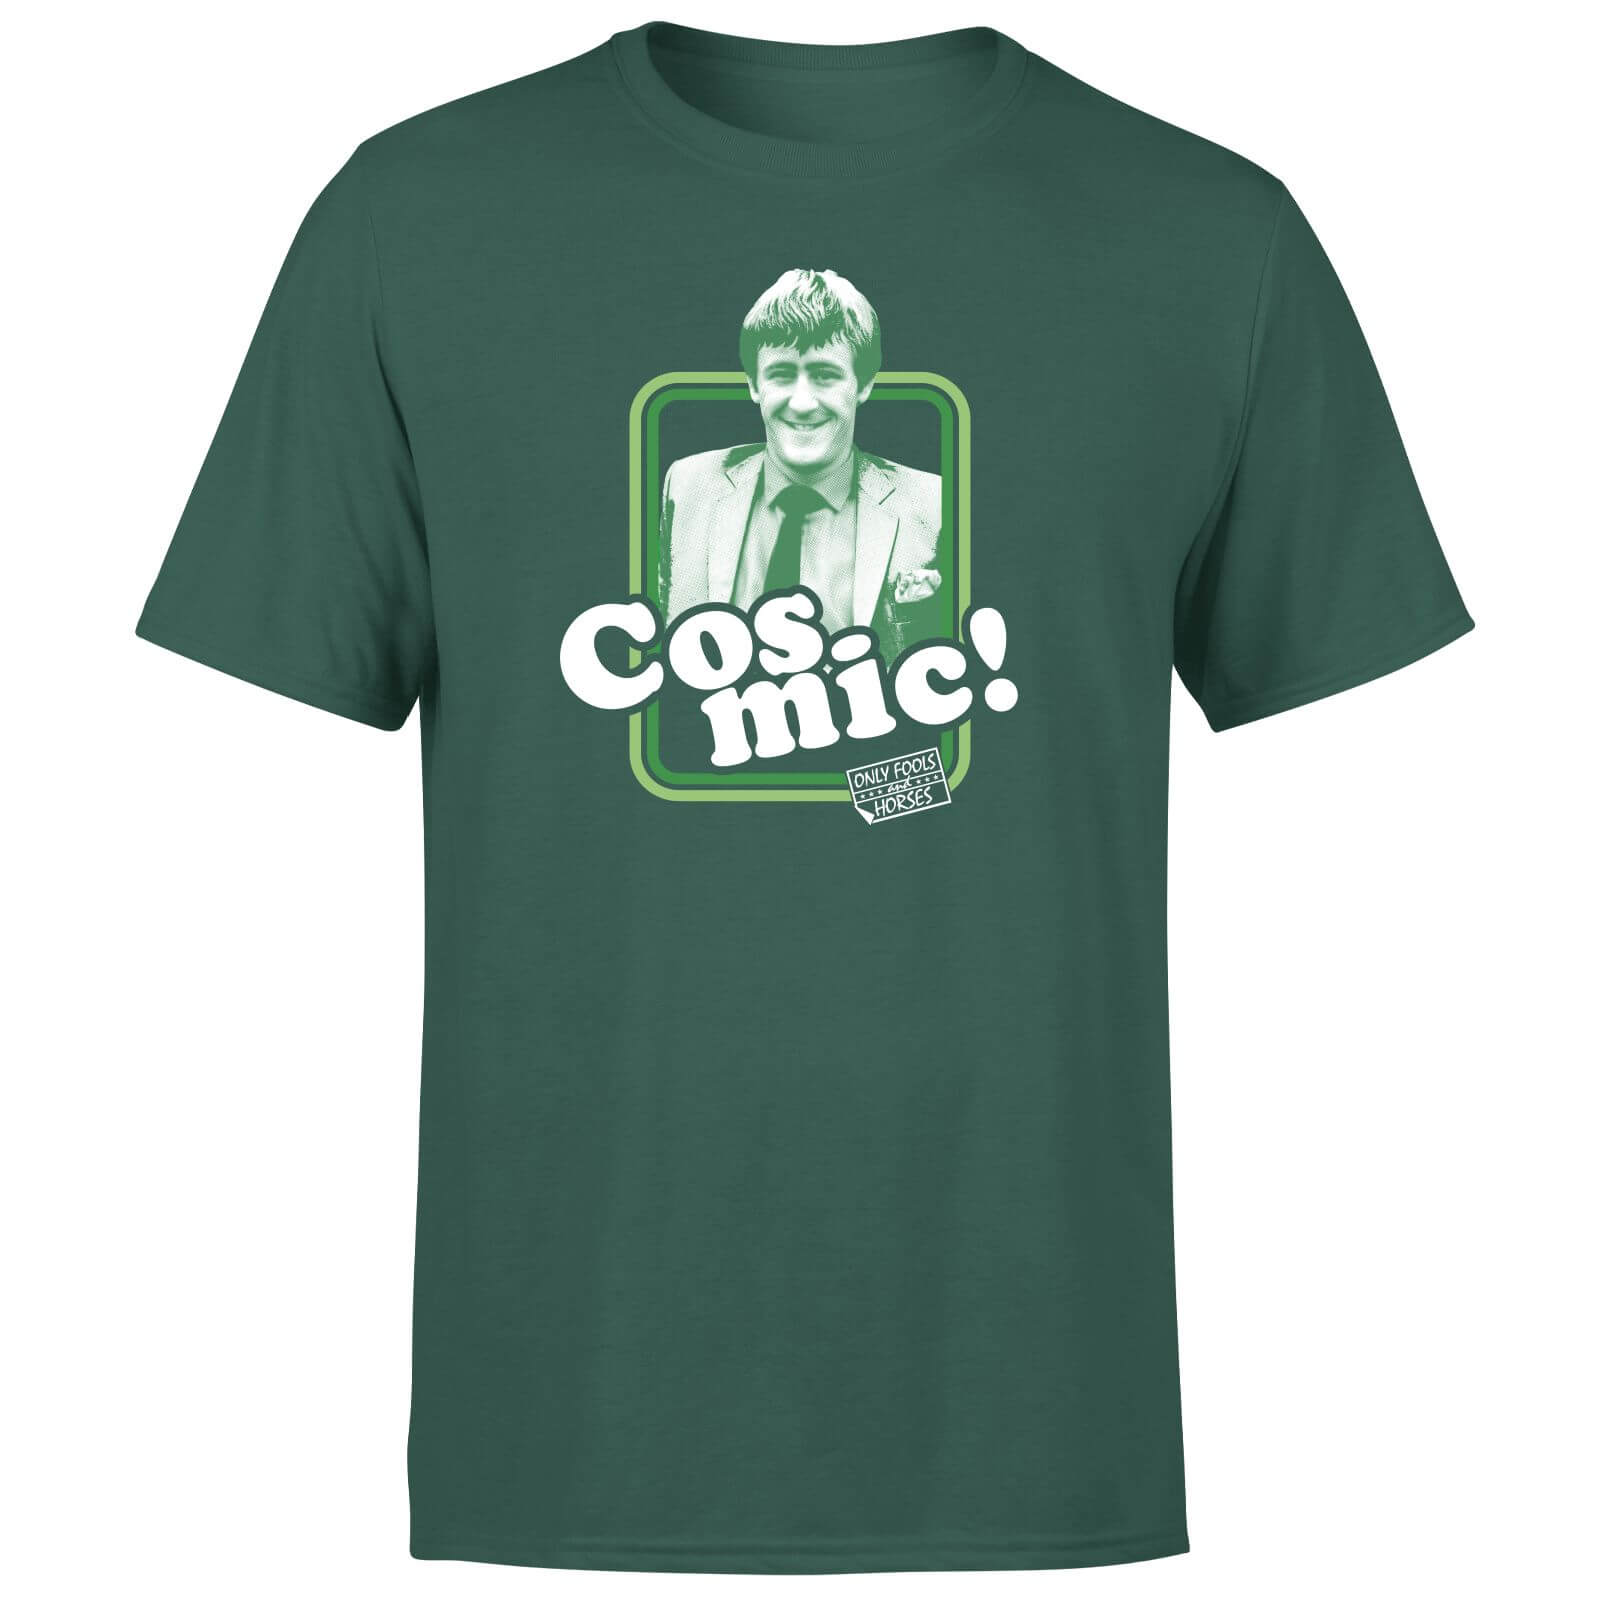 Only Fools And Horses Cos-mic! Men's T-Shirt - Green - XS